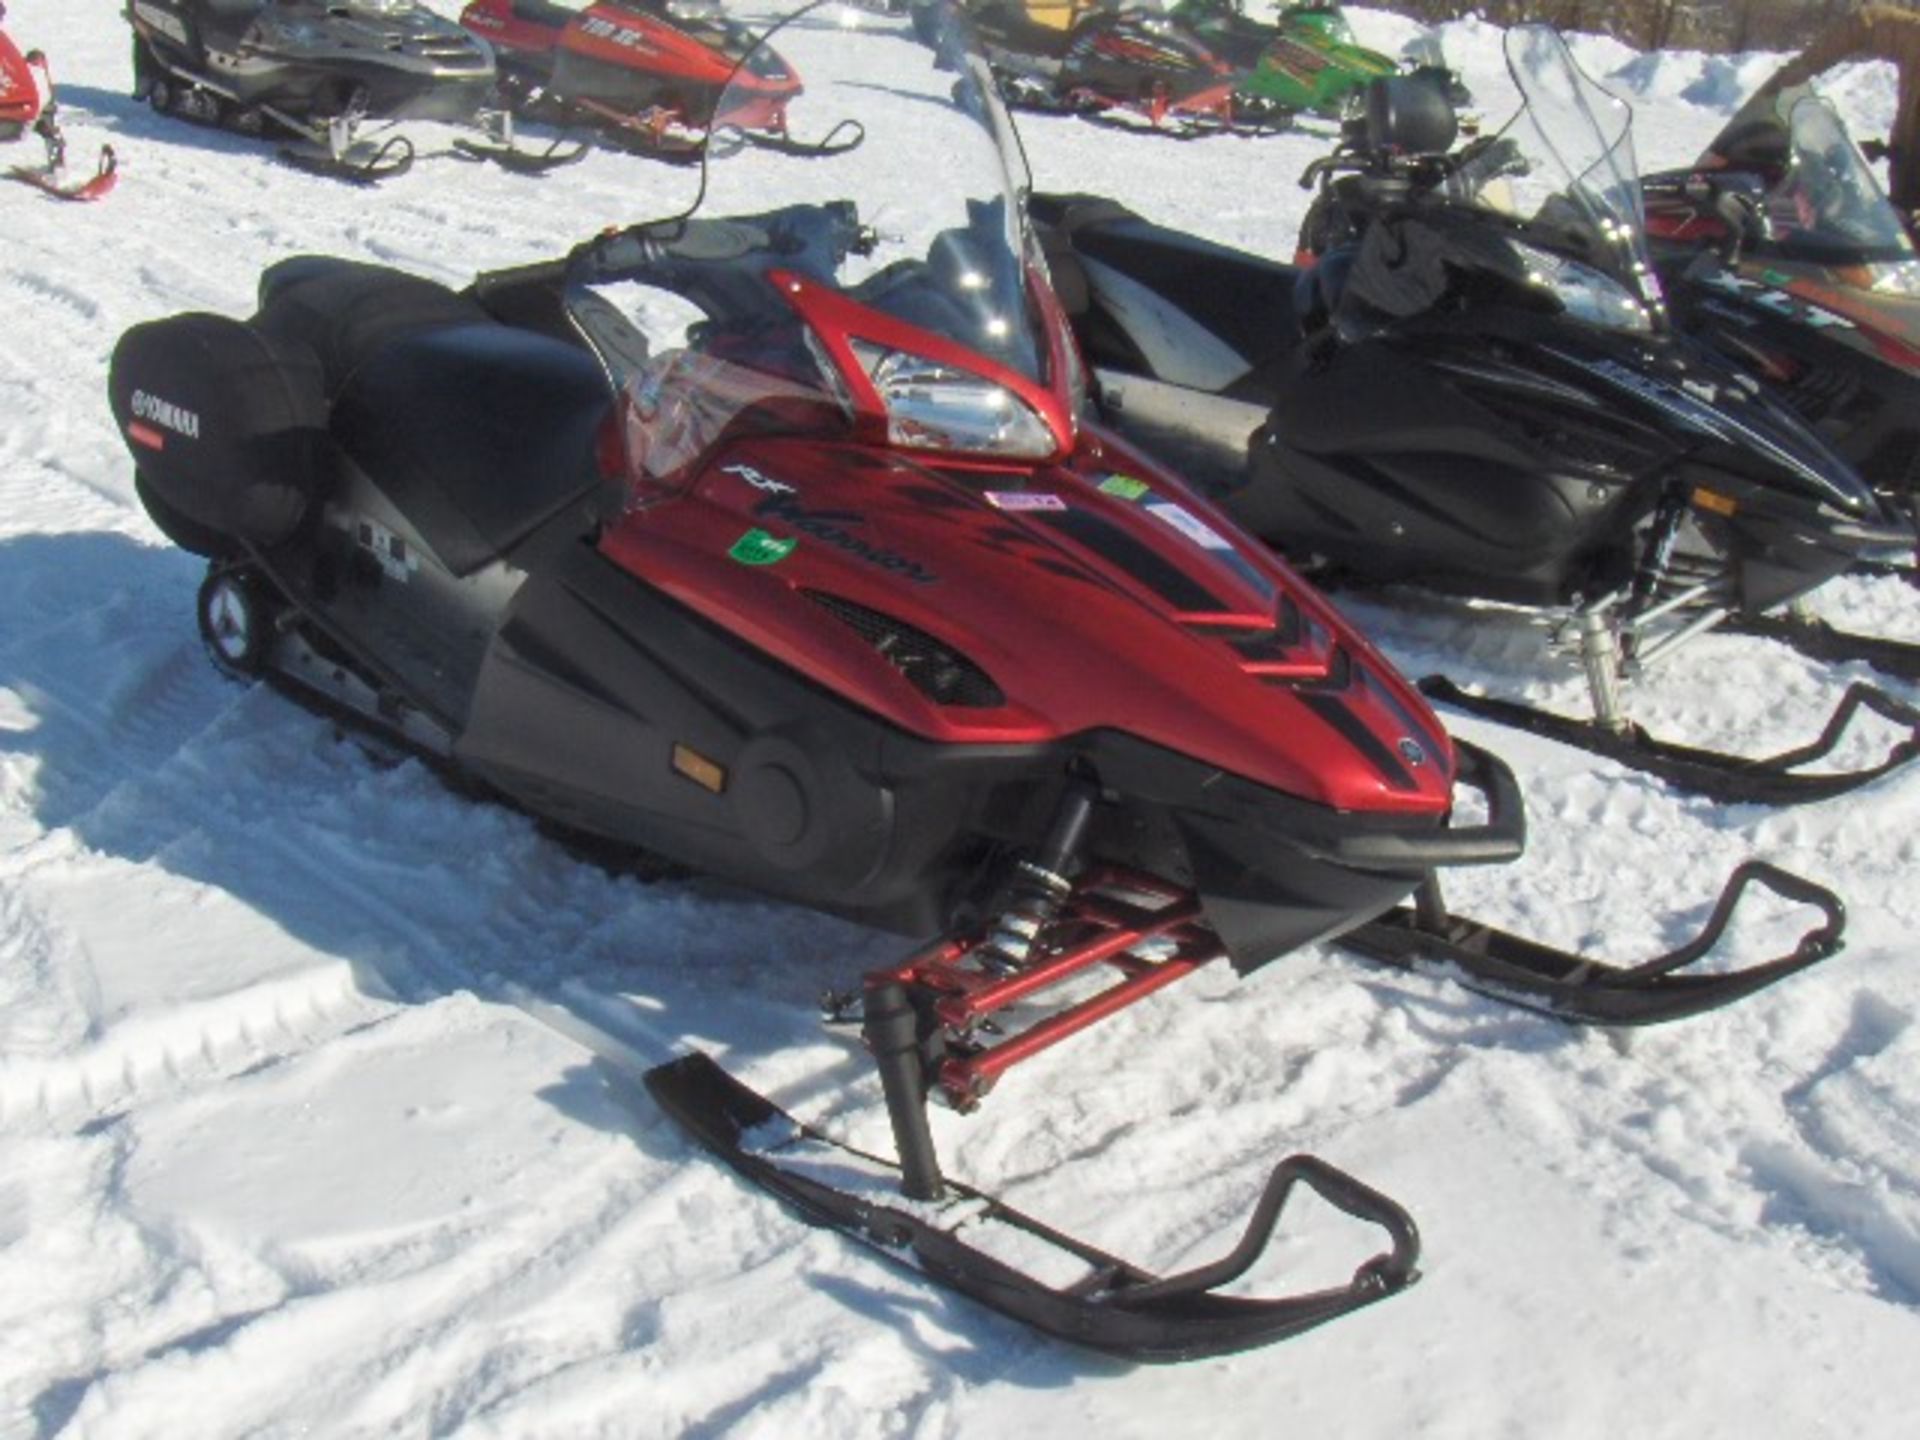 2005 YAMAHA 1100 RX WARRIOR  JYE8FX0045A001996 snowmobile, owner started at time of auction check - Image 2 of 4